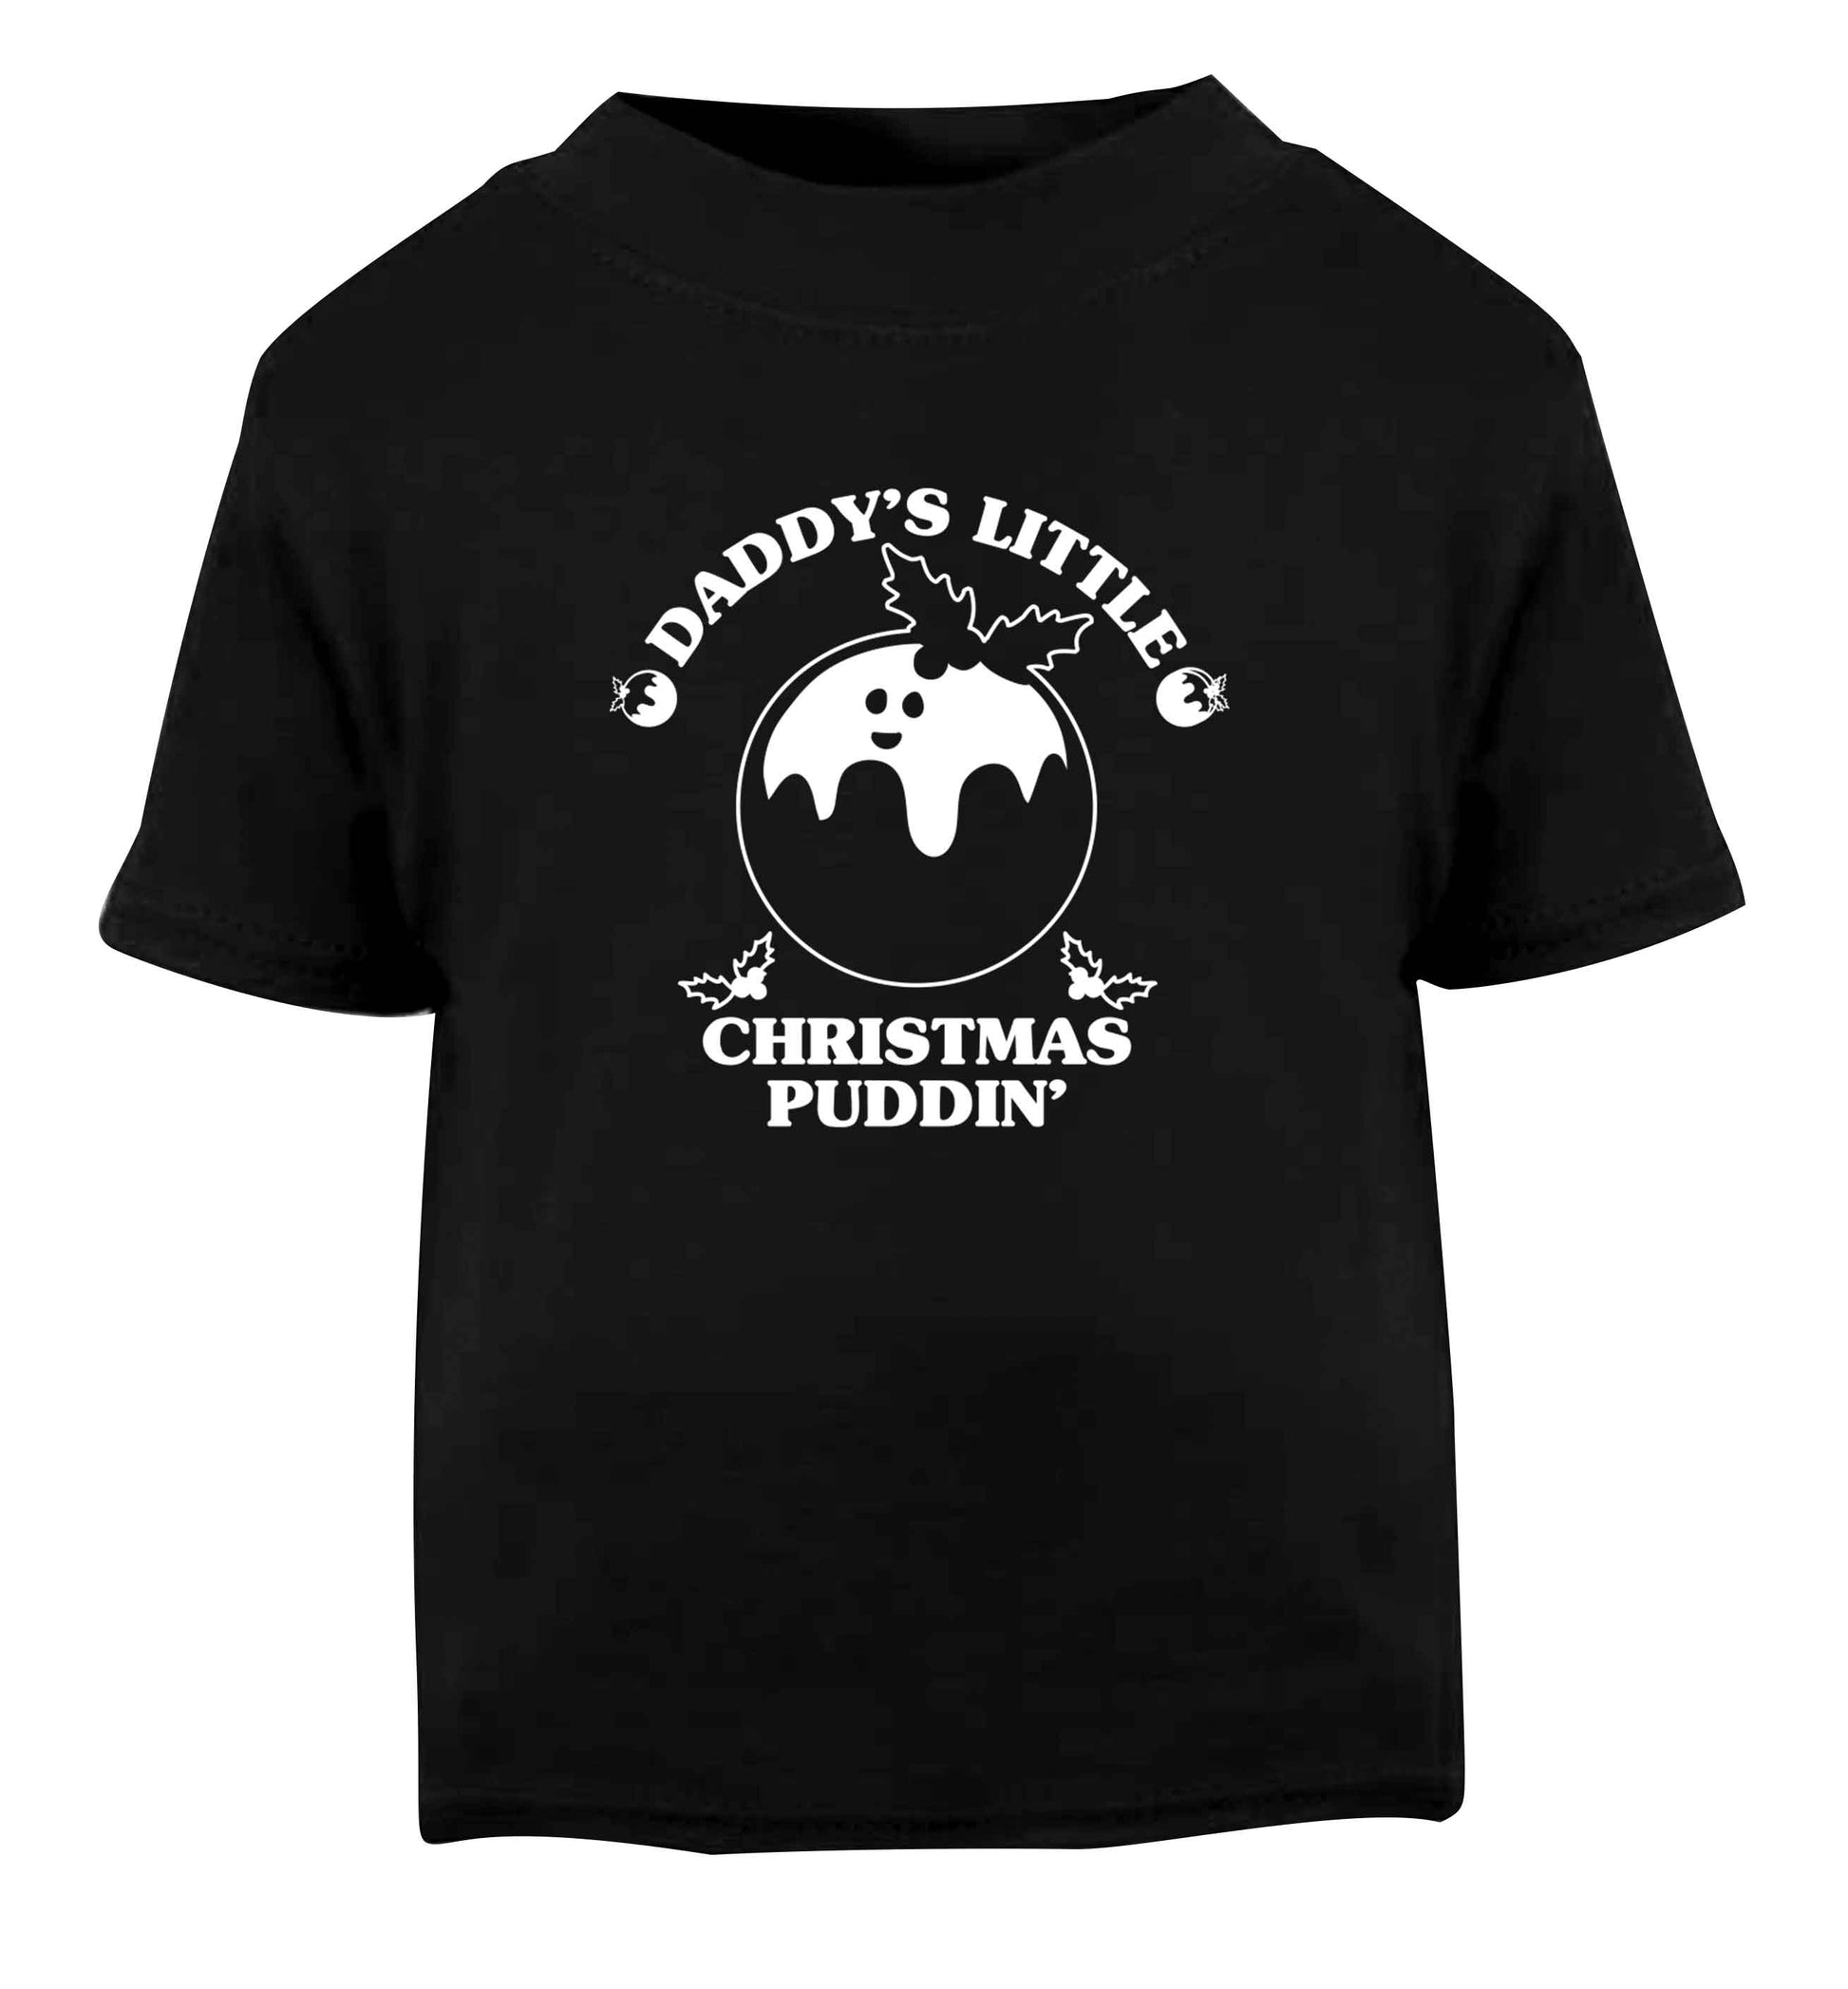 Daddy's little Christmas puddin' Black Baby Toddler Tshirt 2 years